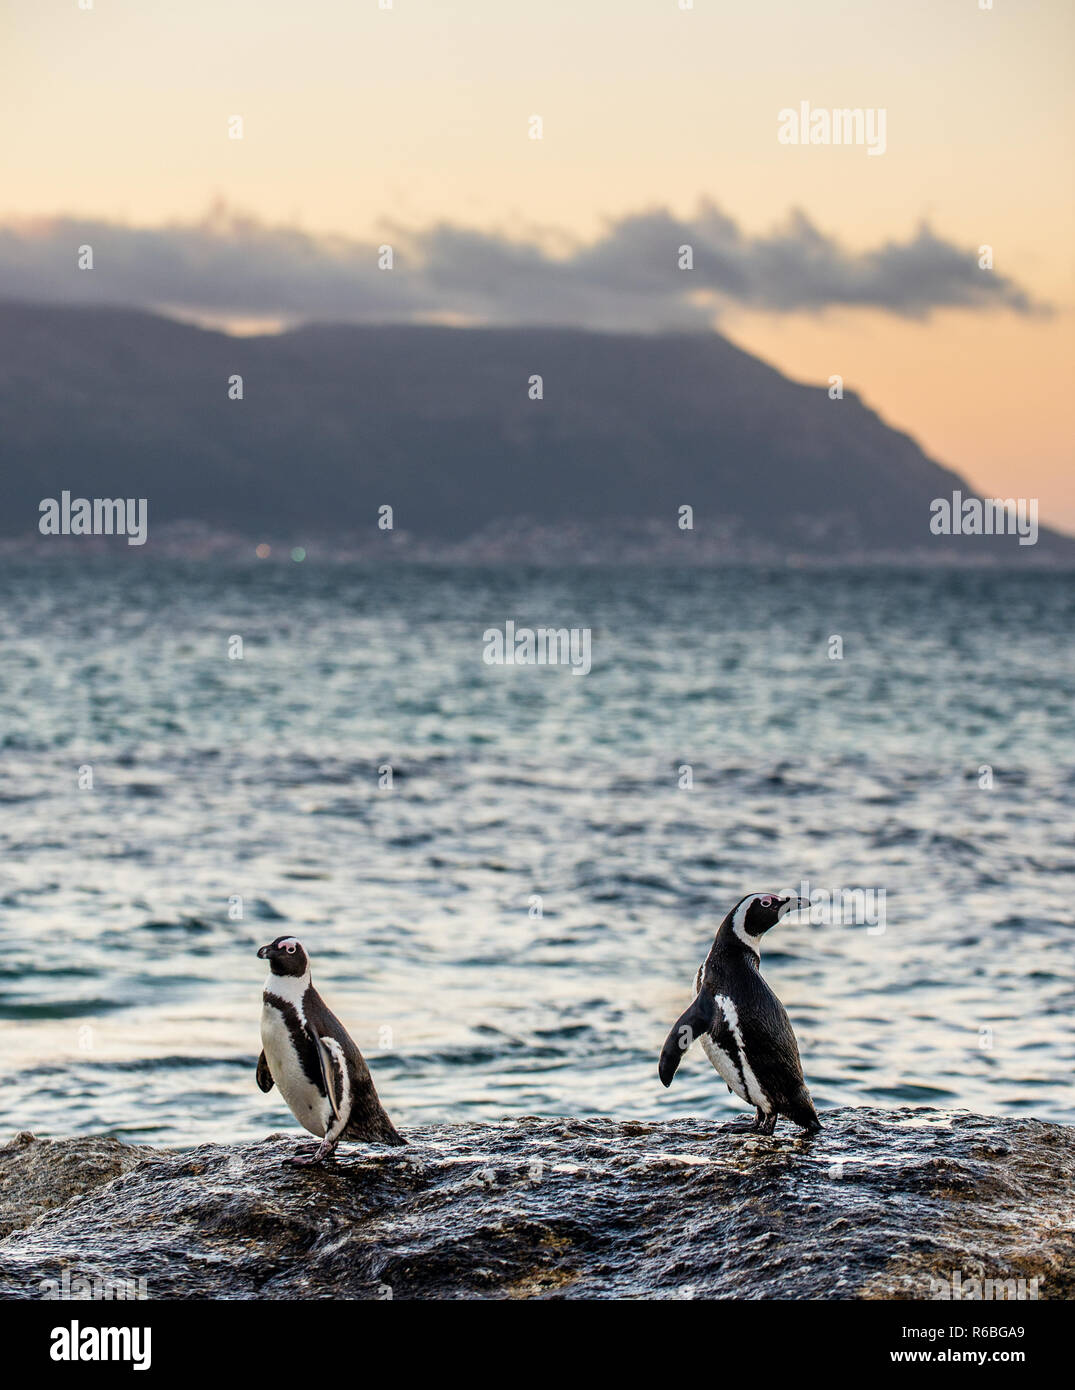 The African penguins on the stony shore in twilight evening with sunset sky. Scientific name: Spheniscus demersus, jackass penguin or black-footed pen Stock Photo